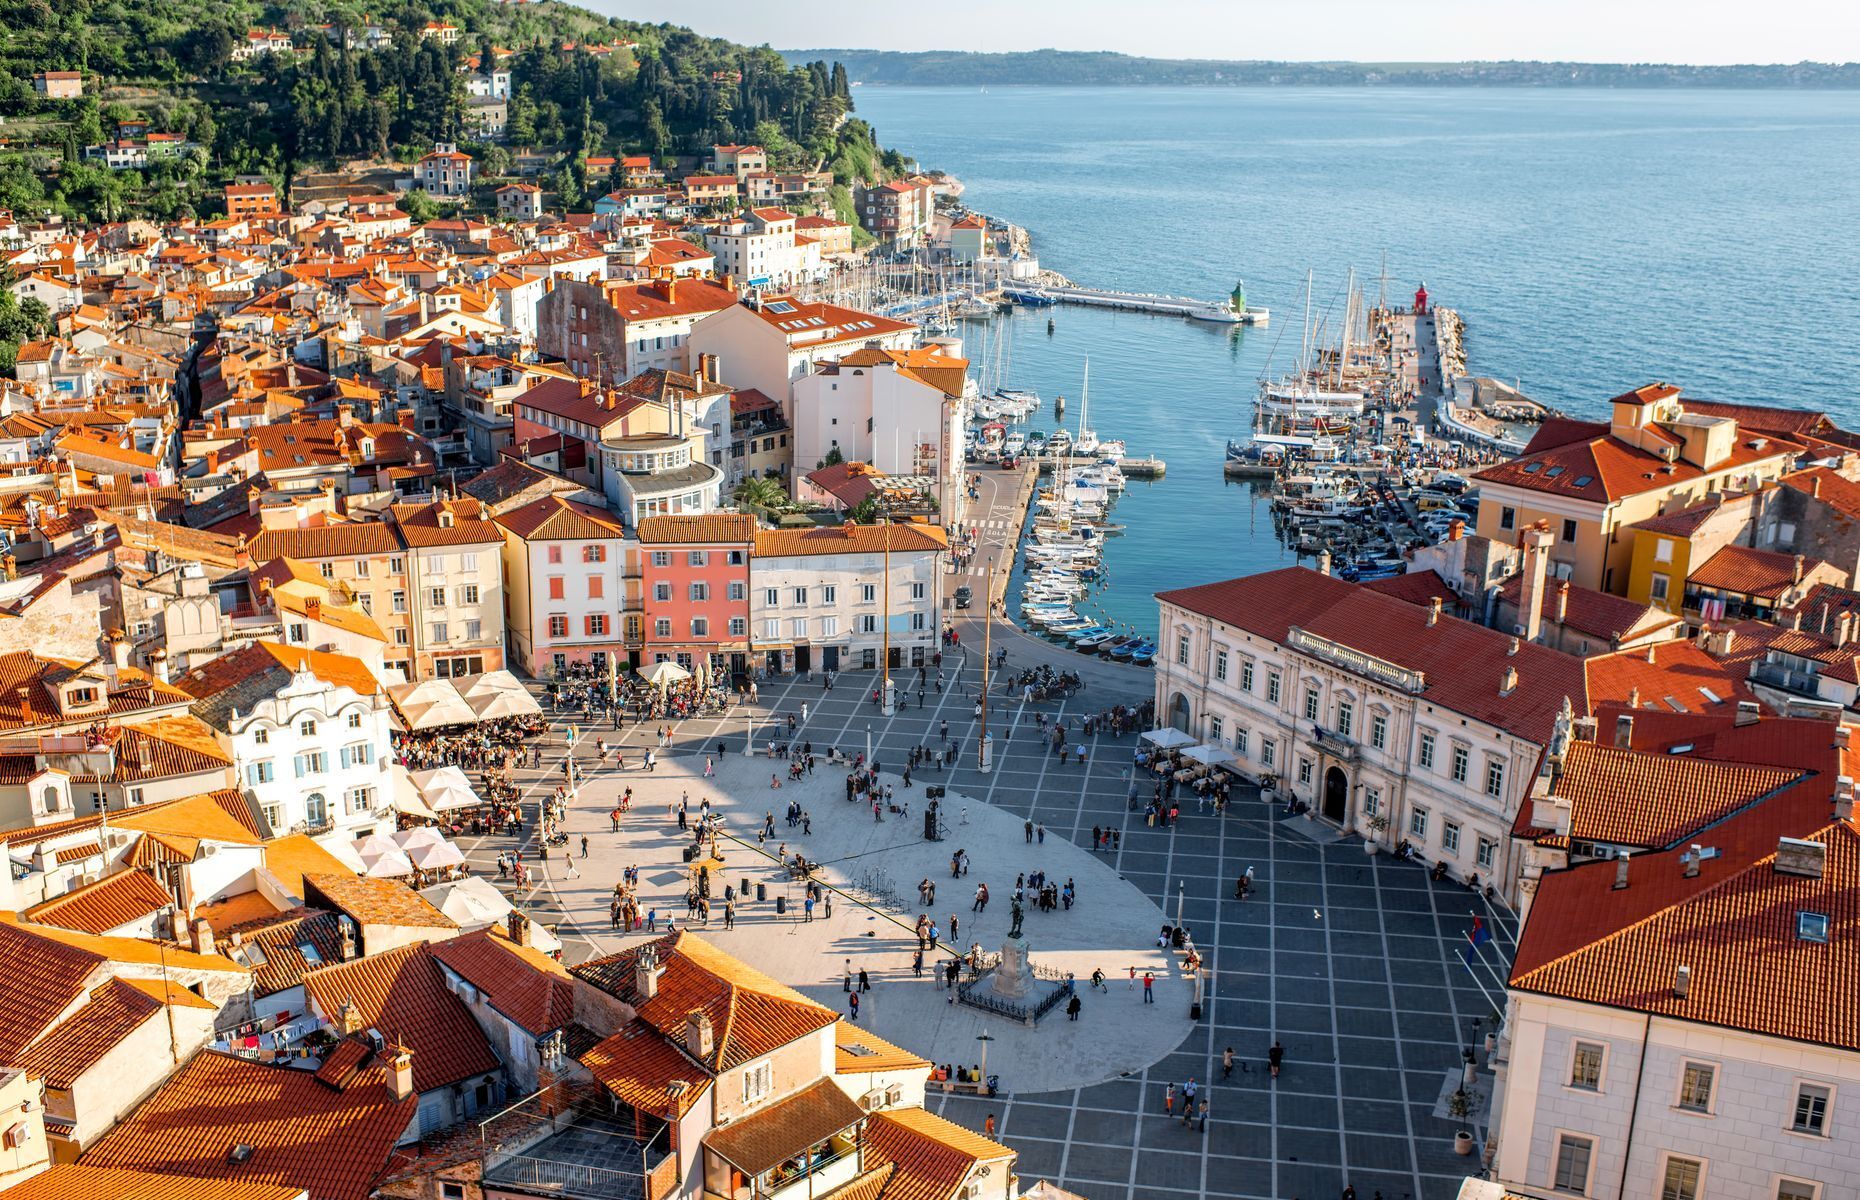 Is the warm spring weather giving you the urge to plan your next vacation? Europe is filled with incredible destinations, including these 20 little-known cities that are worth visiting at least once in your lifetime. Whether you’re looking for spectacular landscapes or stunning cultural and culinary getaways, these uncommon destinations are sure to surprise you.